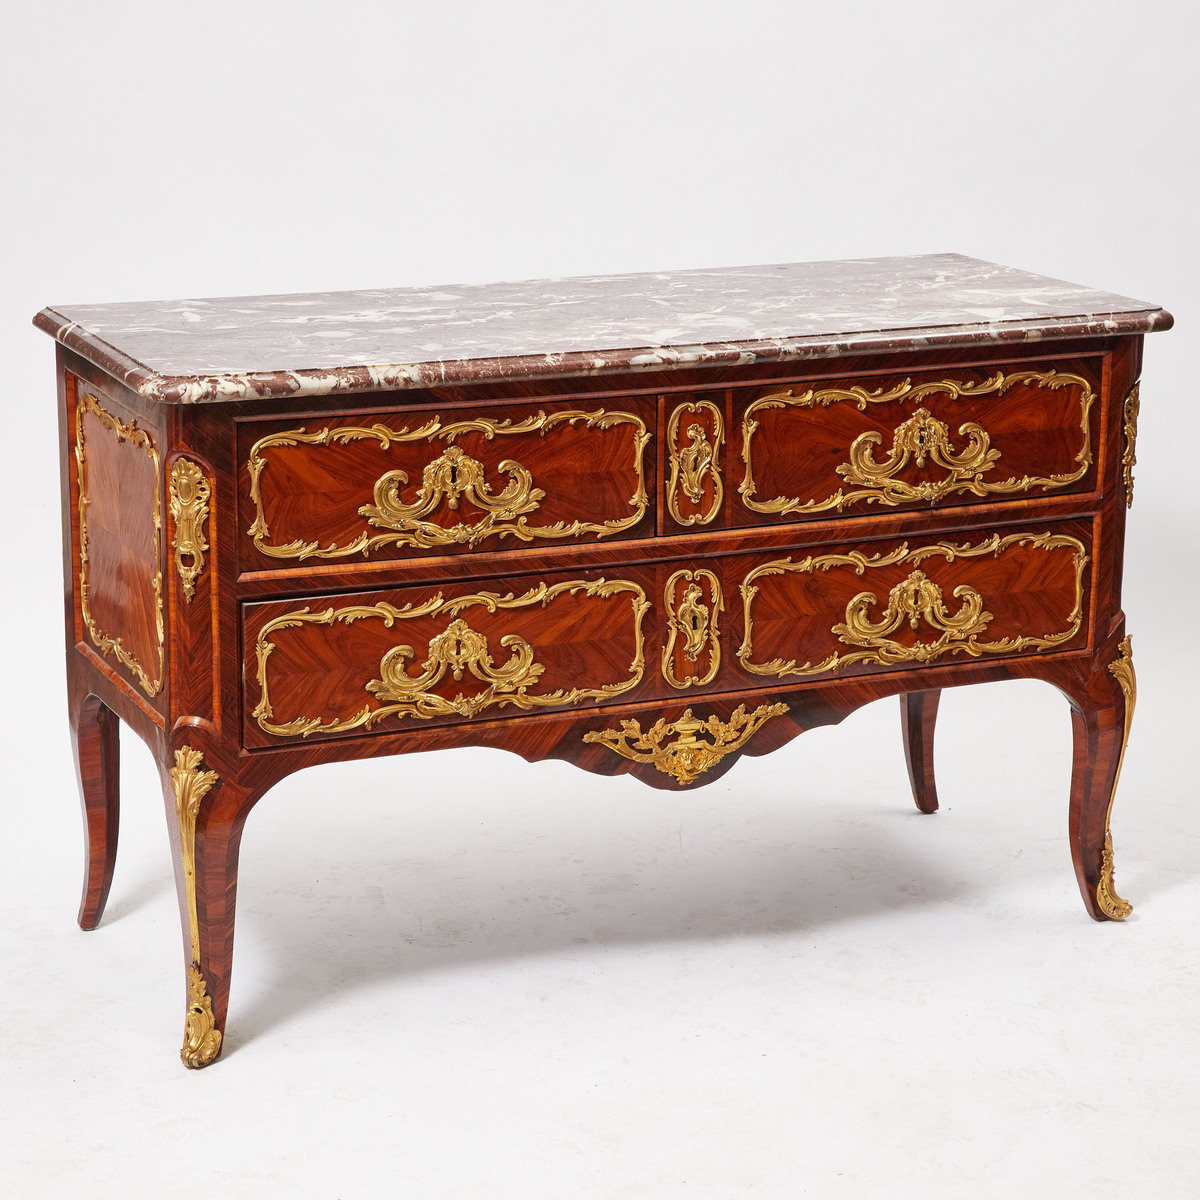 Louis XV/XVI Transitional Ormolu-Mounted Tulipwood and Purplewood Parquetry Commode by Delormé, 1750